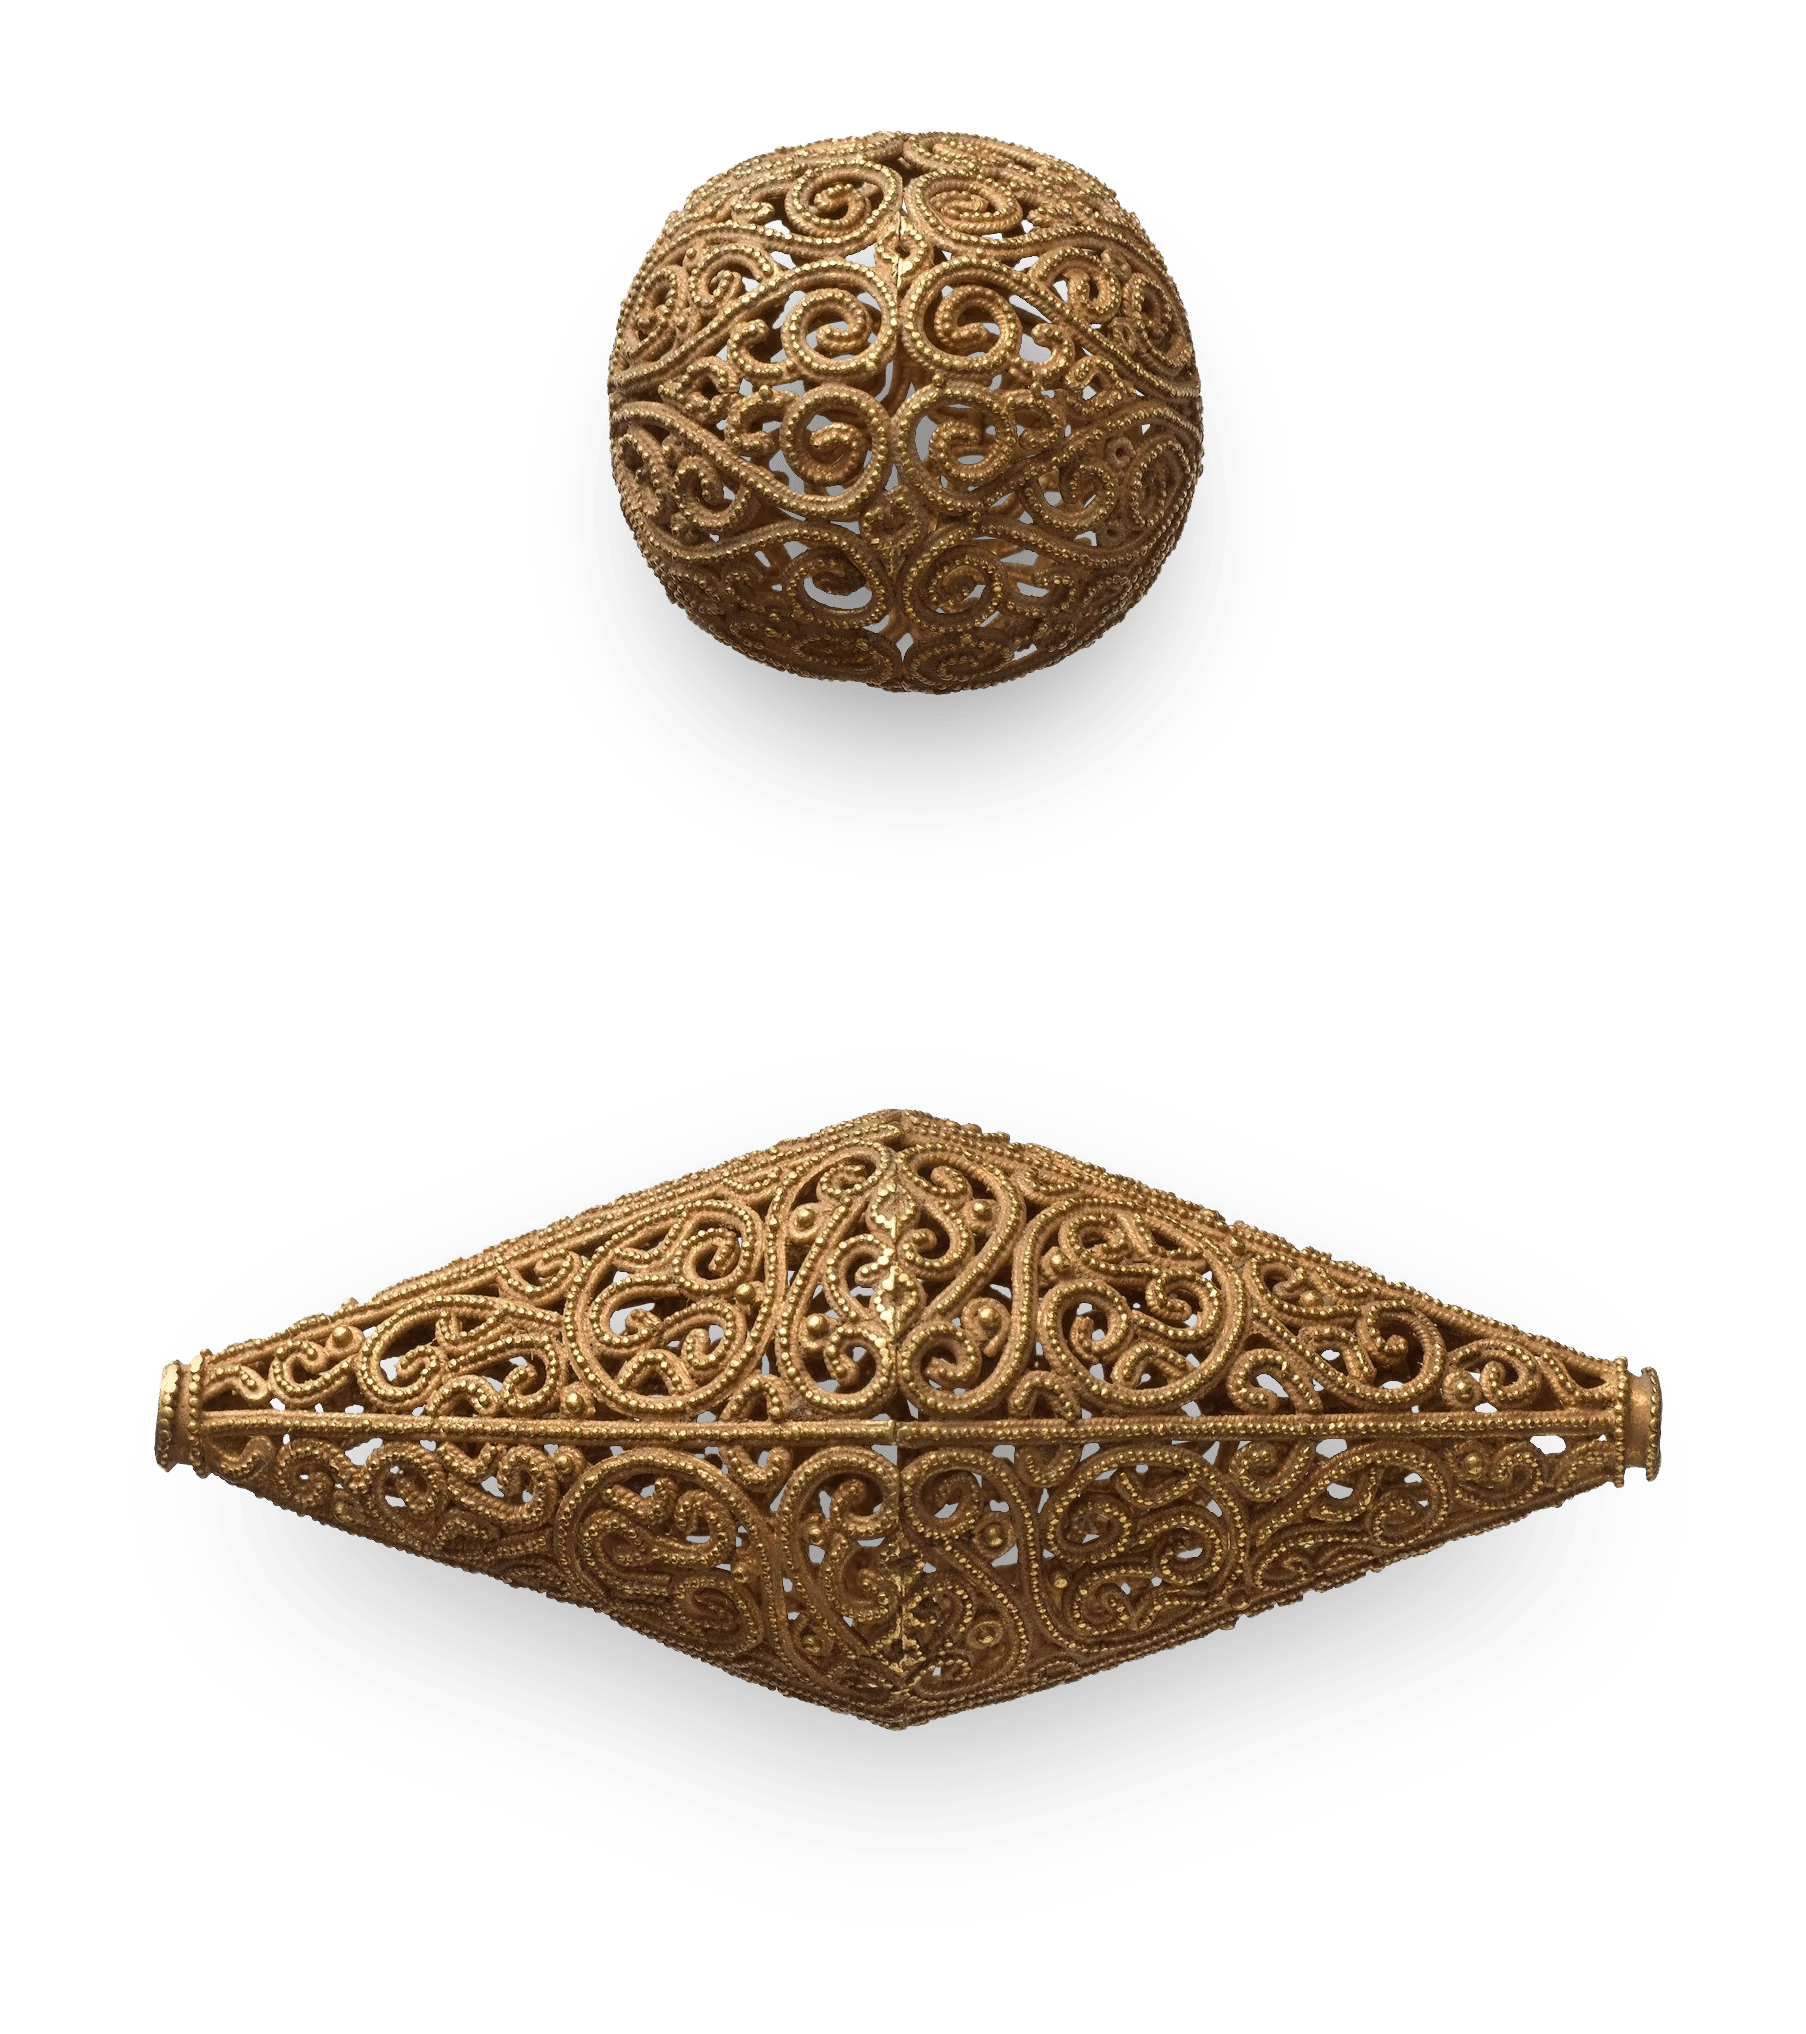 Spherical and Biconical Gold Beads, Islamic Dynastic Art